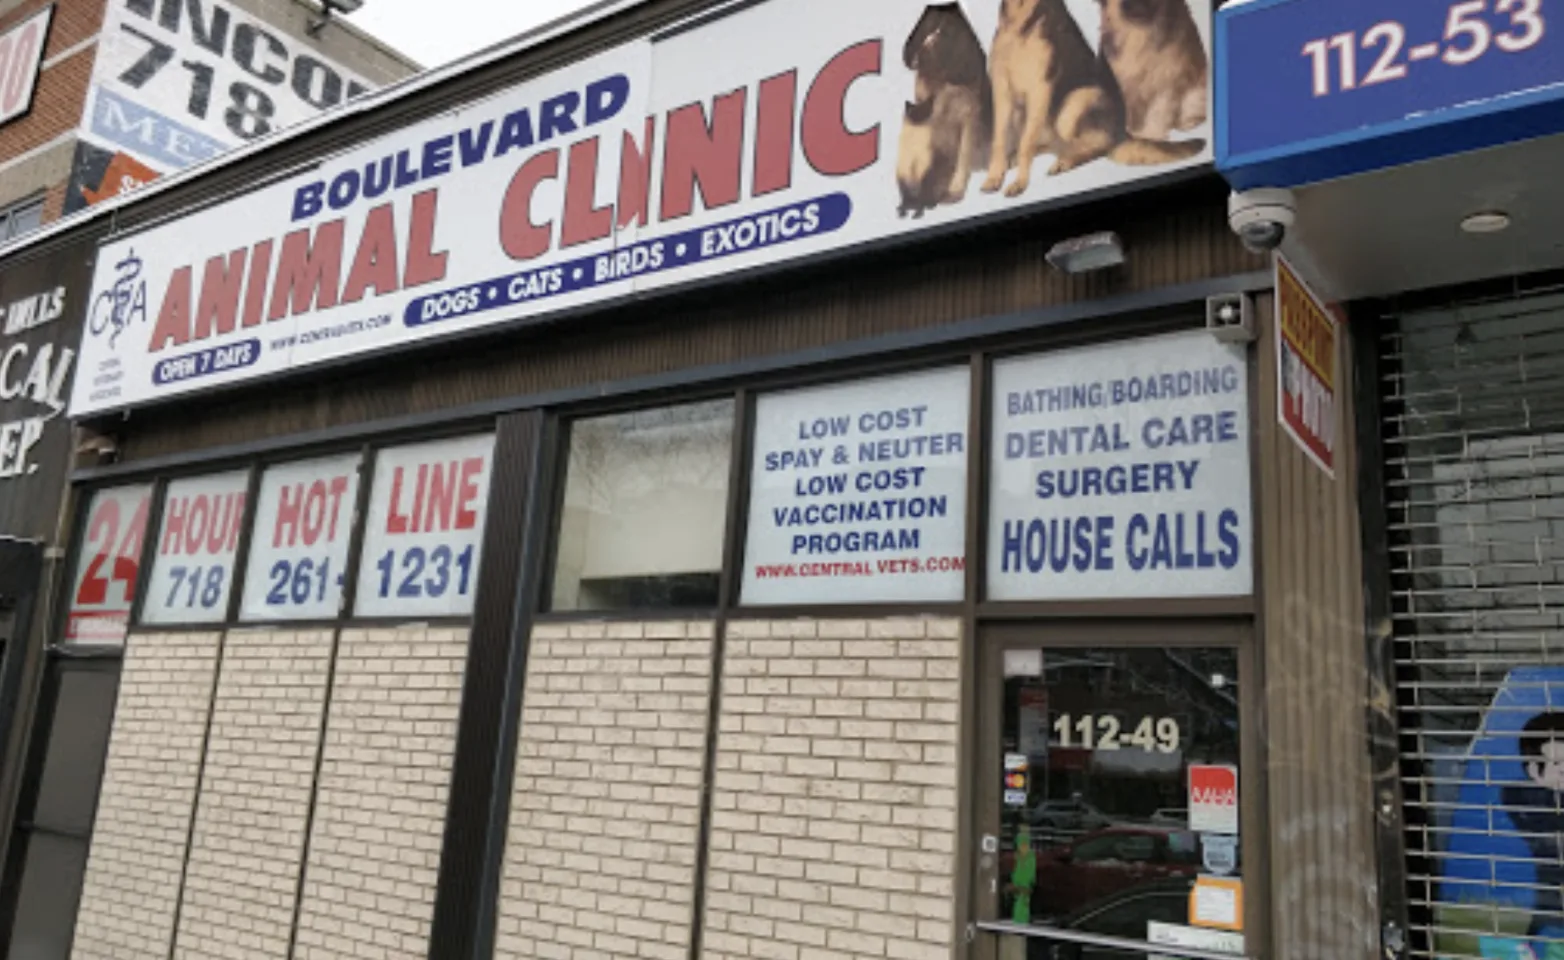 Exterior of Premier Veterinary Medical Group - Boulevard Animal Clinic